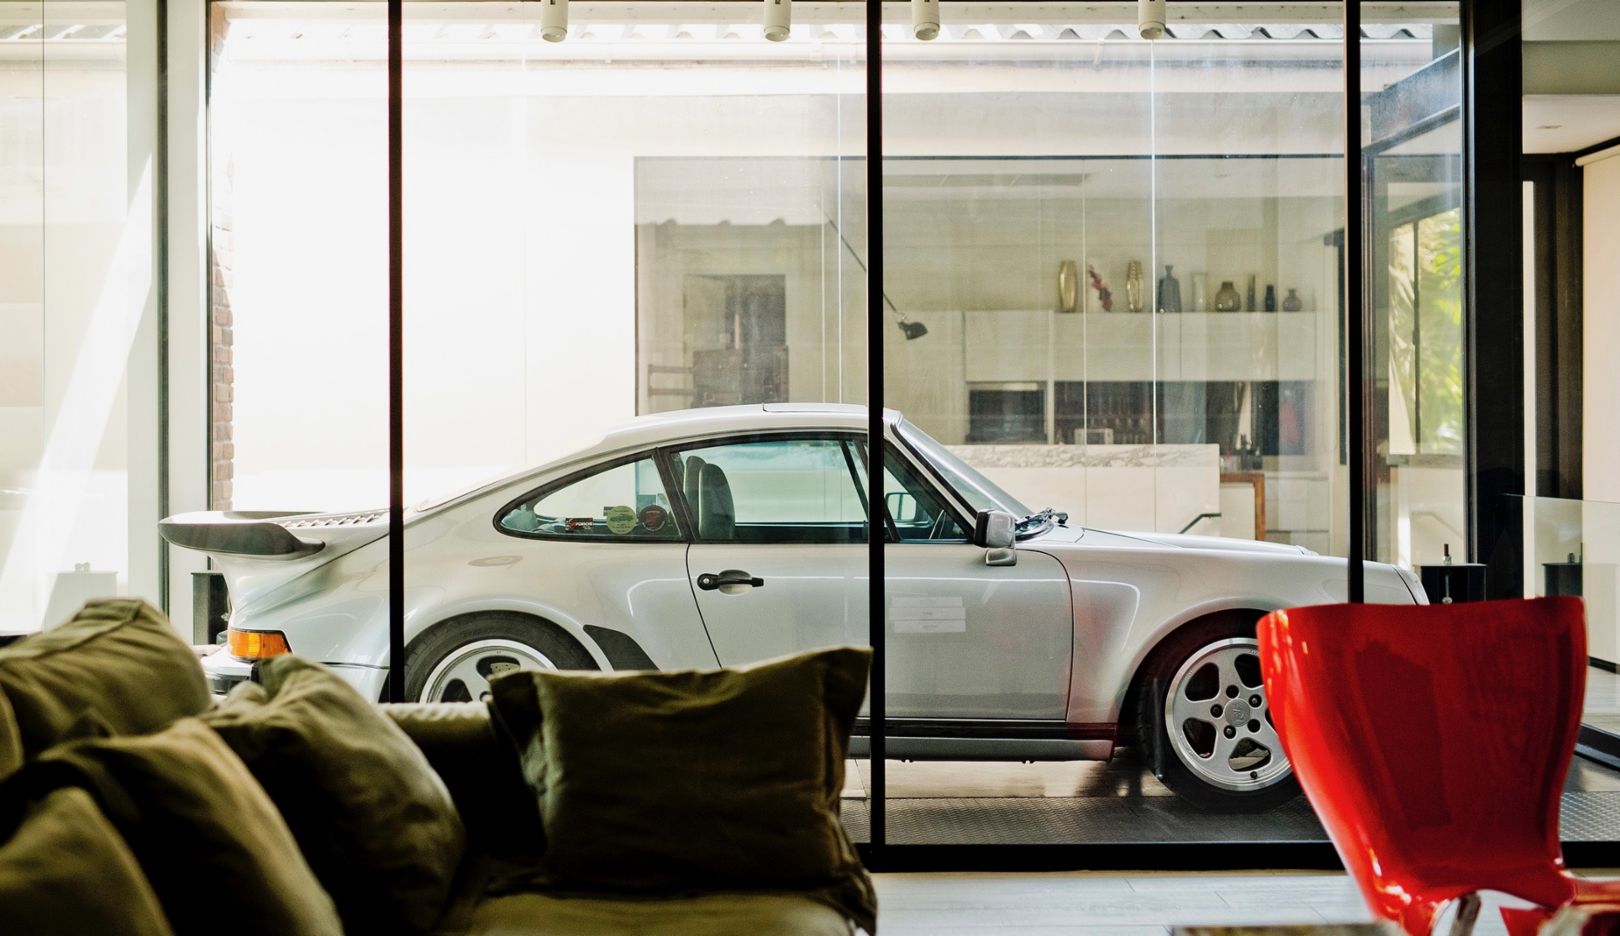 His Home: “Safe haven and childhood dream at the same time. This is how I always wanted to live. Here I can take time off to relax or spend it with my cars without even driving them.”